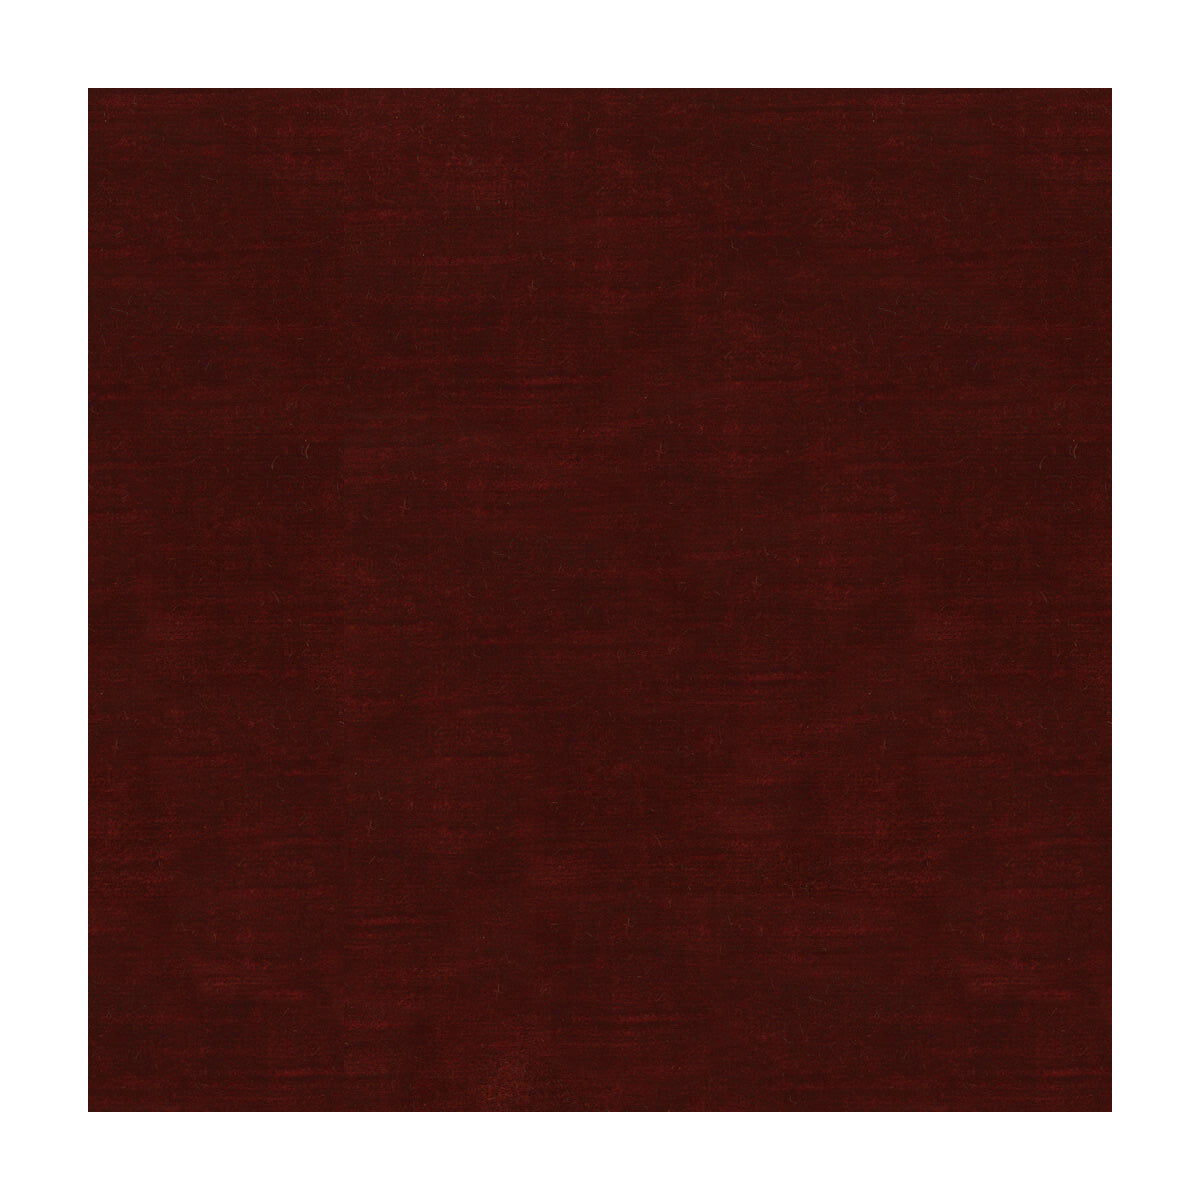 High Impact fabric in crimson color - pattern 34329.24.0 - by Kravet Couture